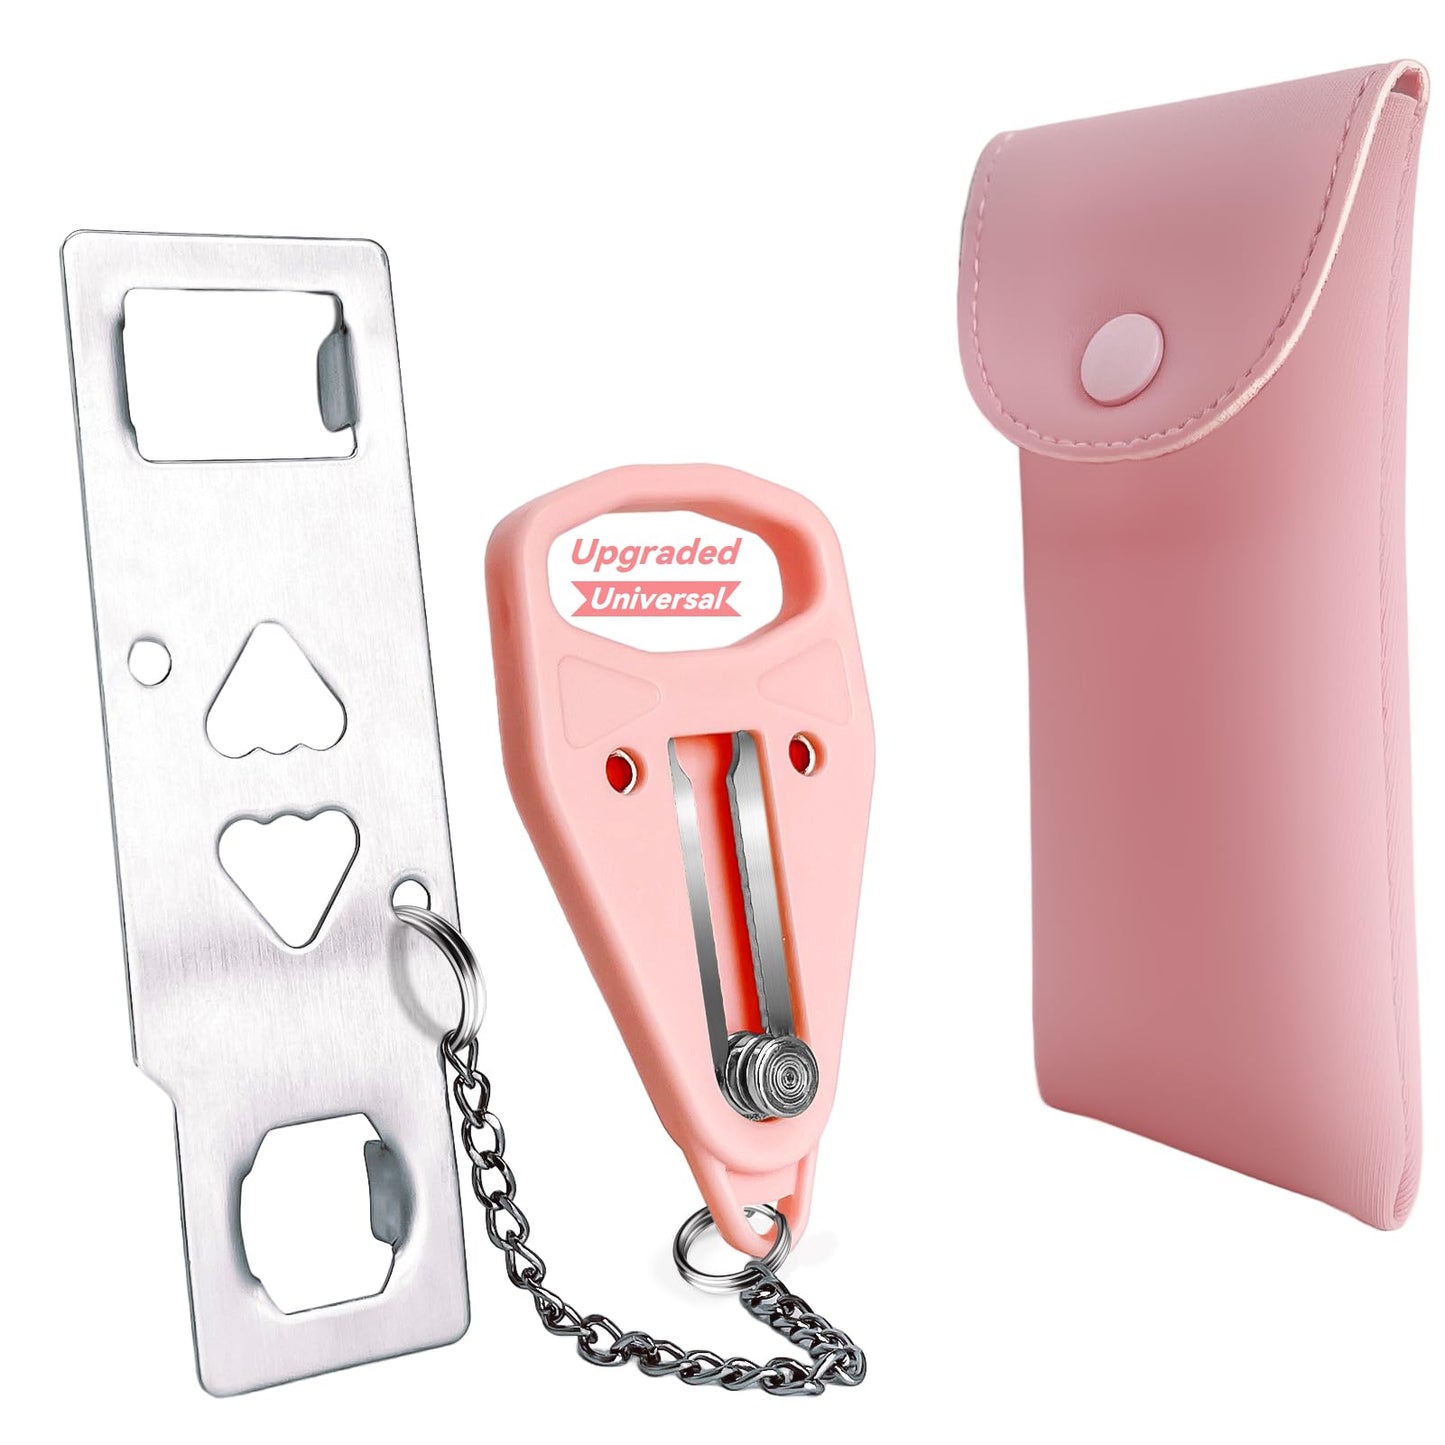 AceMining Portable Door Lock Home Security Door Locker Travel Lockdown Locks for Additional Safety and Privacy Perfect for Traveling Hotel Home Apartment College-Pink(1 Pack)